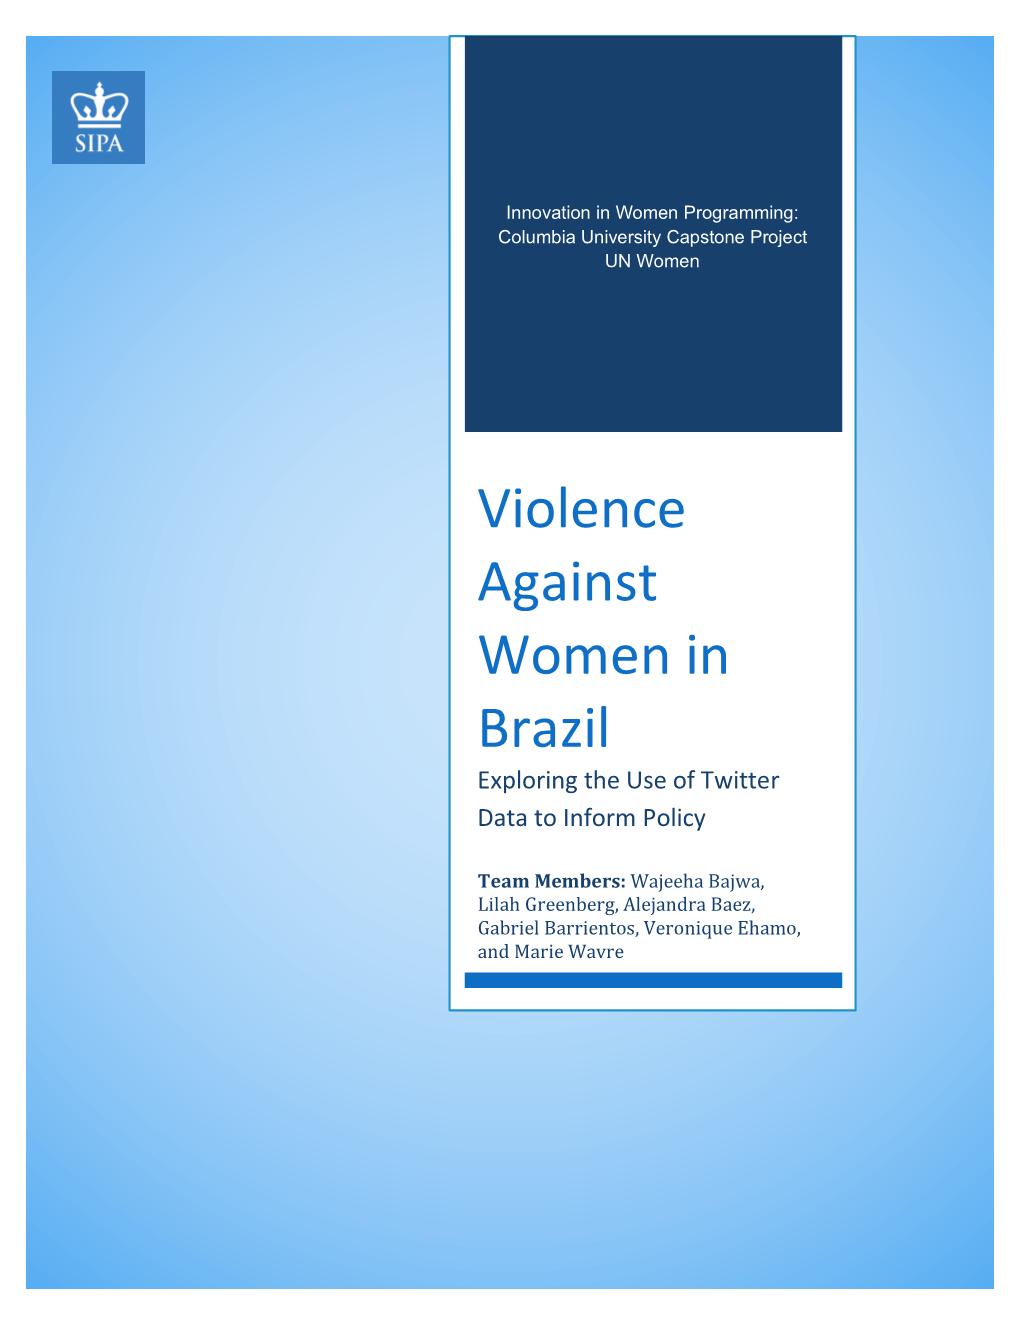 Violence Against Women in Brazil Exploring the Use of Twitter Data to Inform Policy